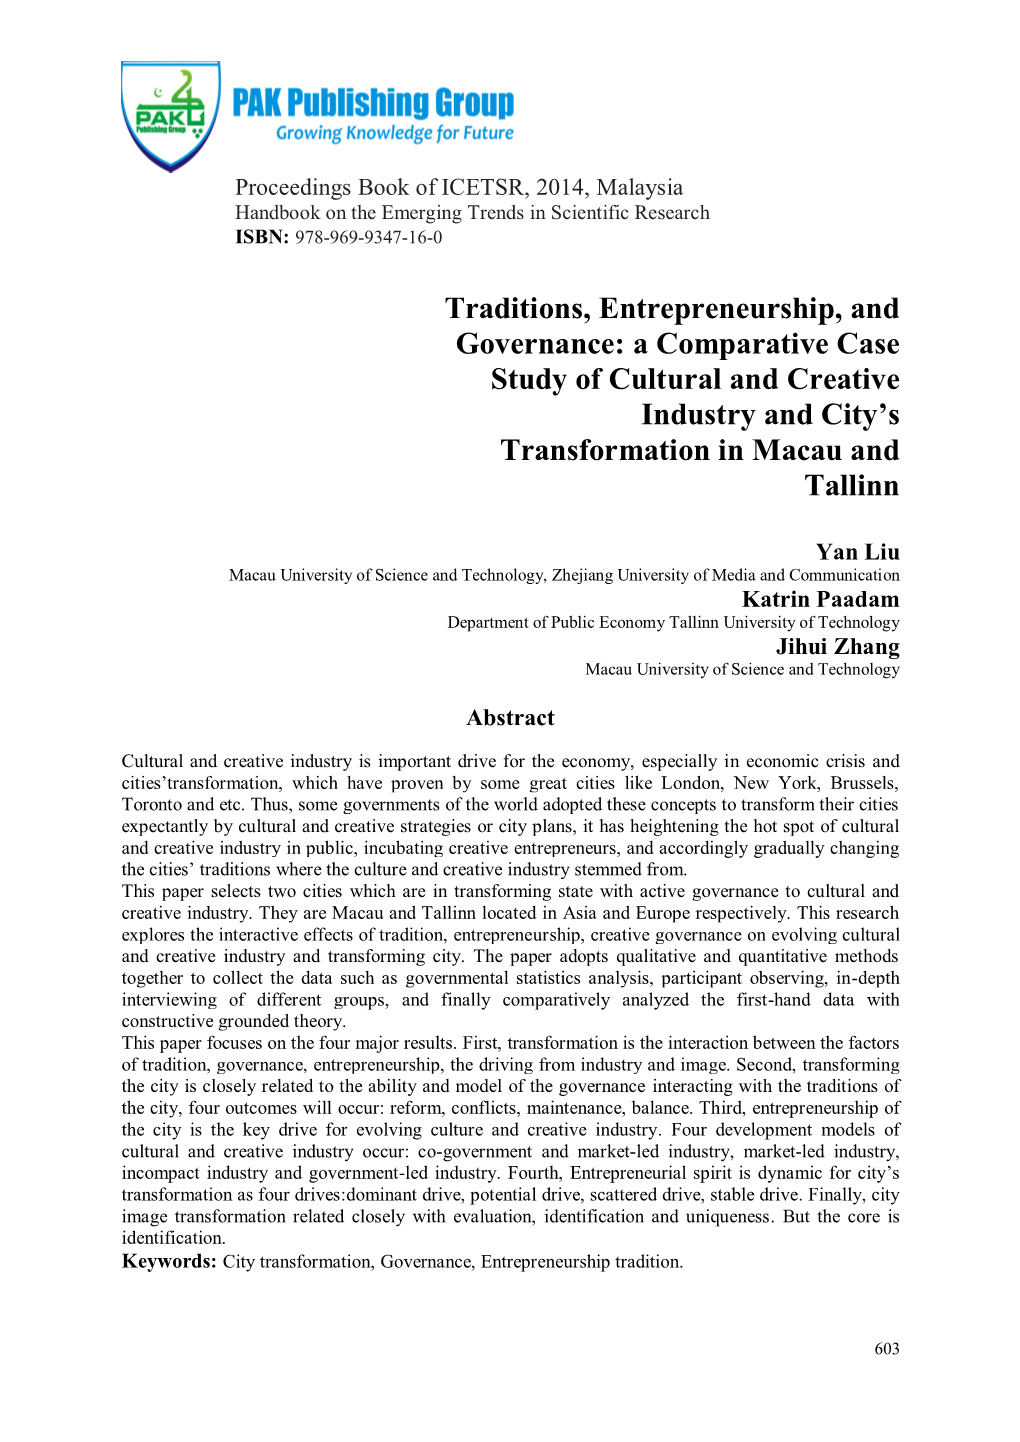 Traditions, Entrepreneurship, and Governance: a Comparative Case Study of Cultural and Creative Industry and City’S Transformation in Macau and Tallinn